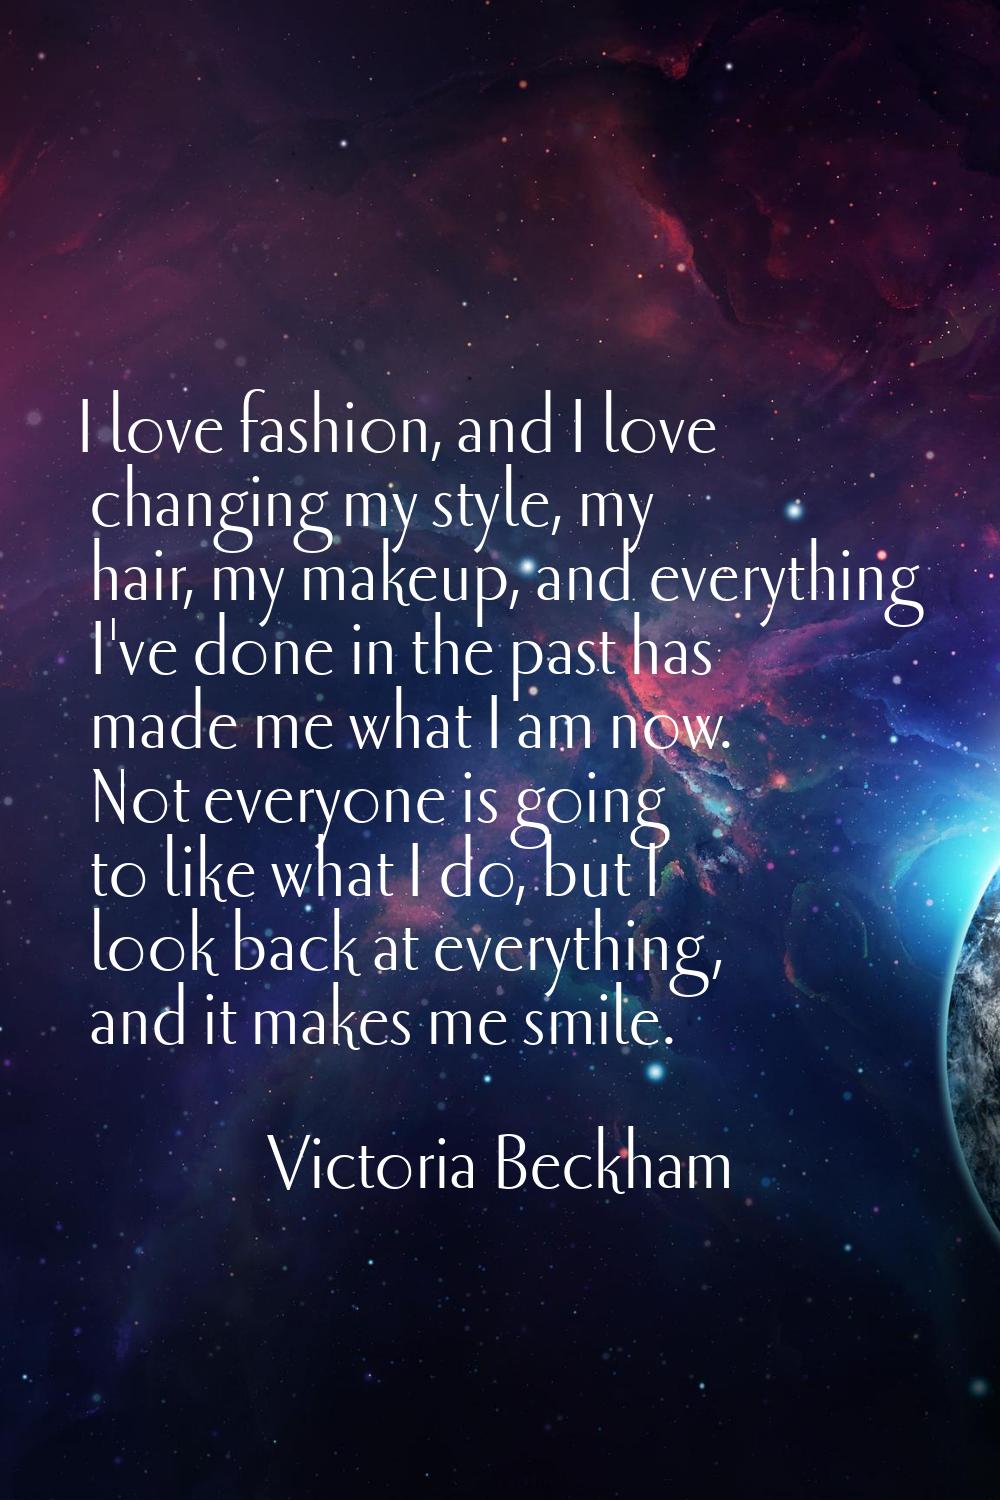 I love fashion, and I love changing my style, my hair, my makeup, and everything I've done in the p